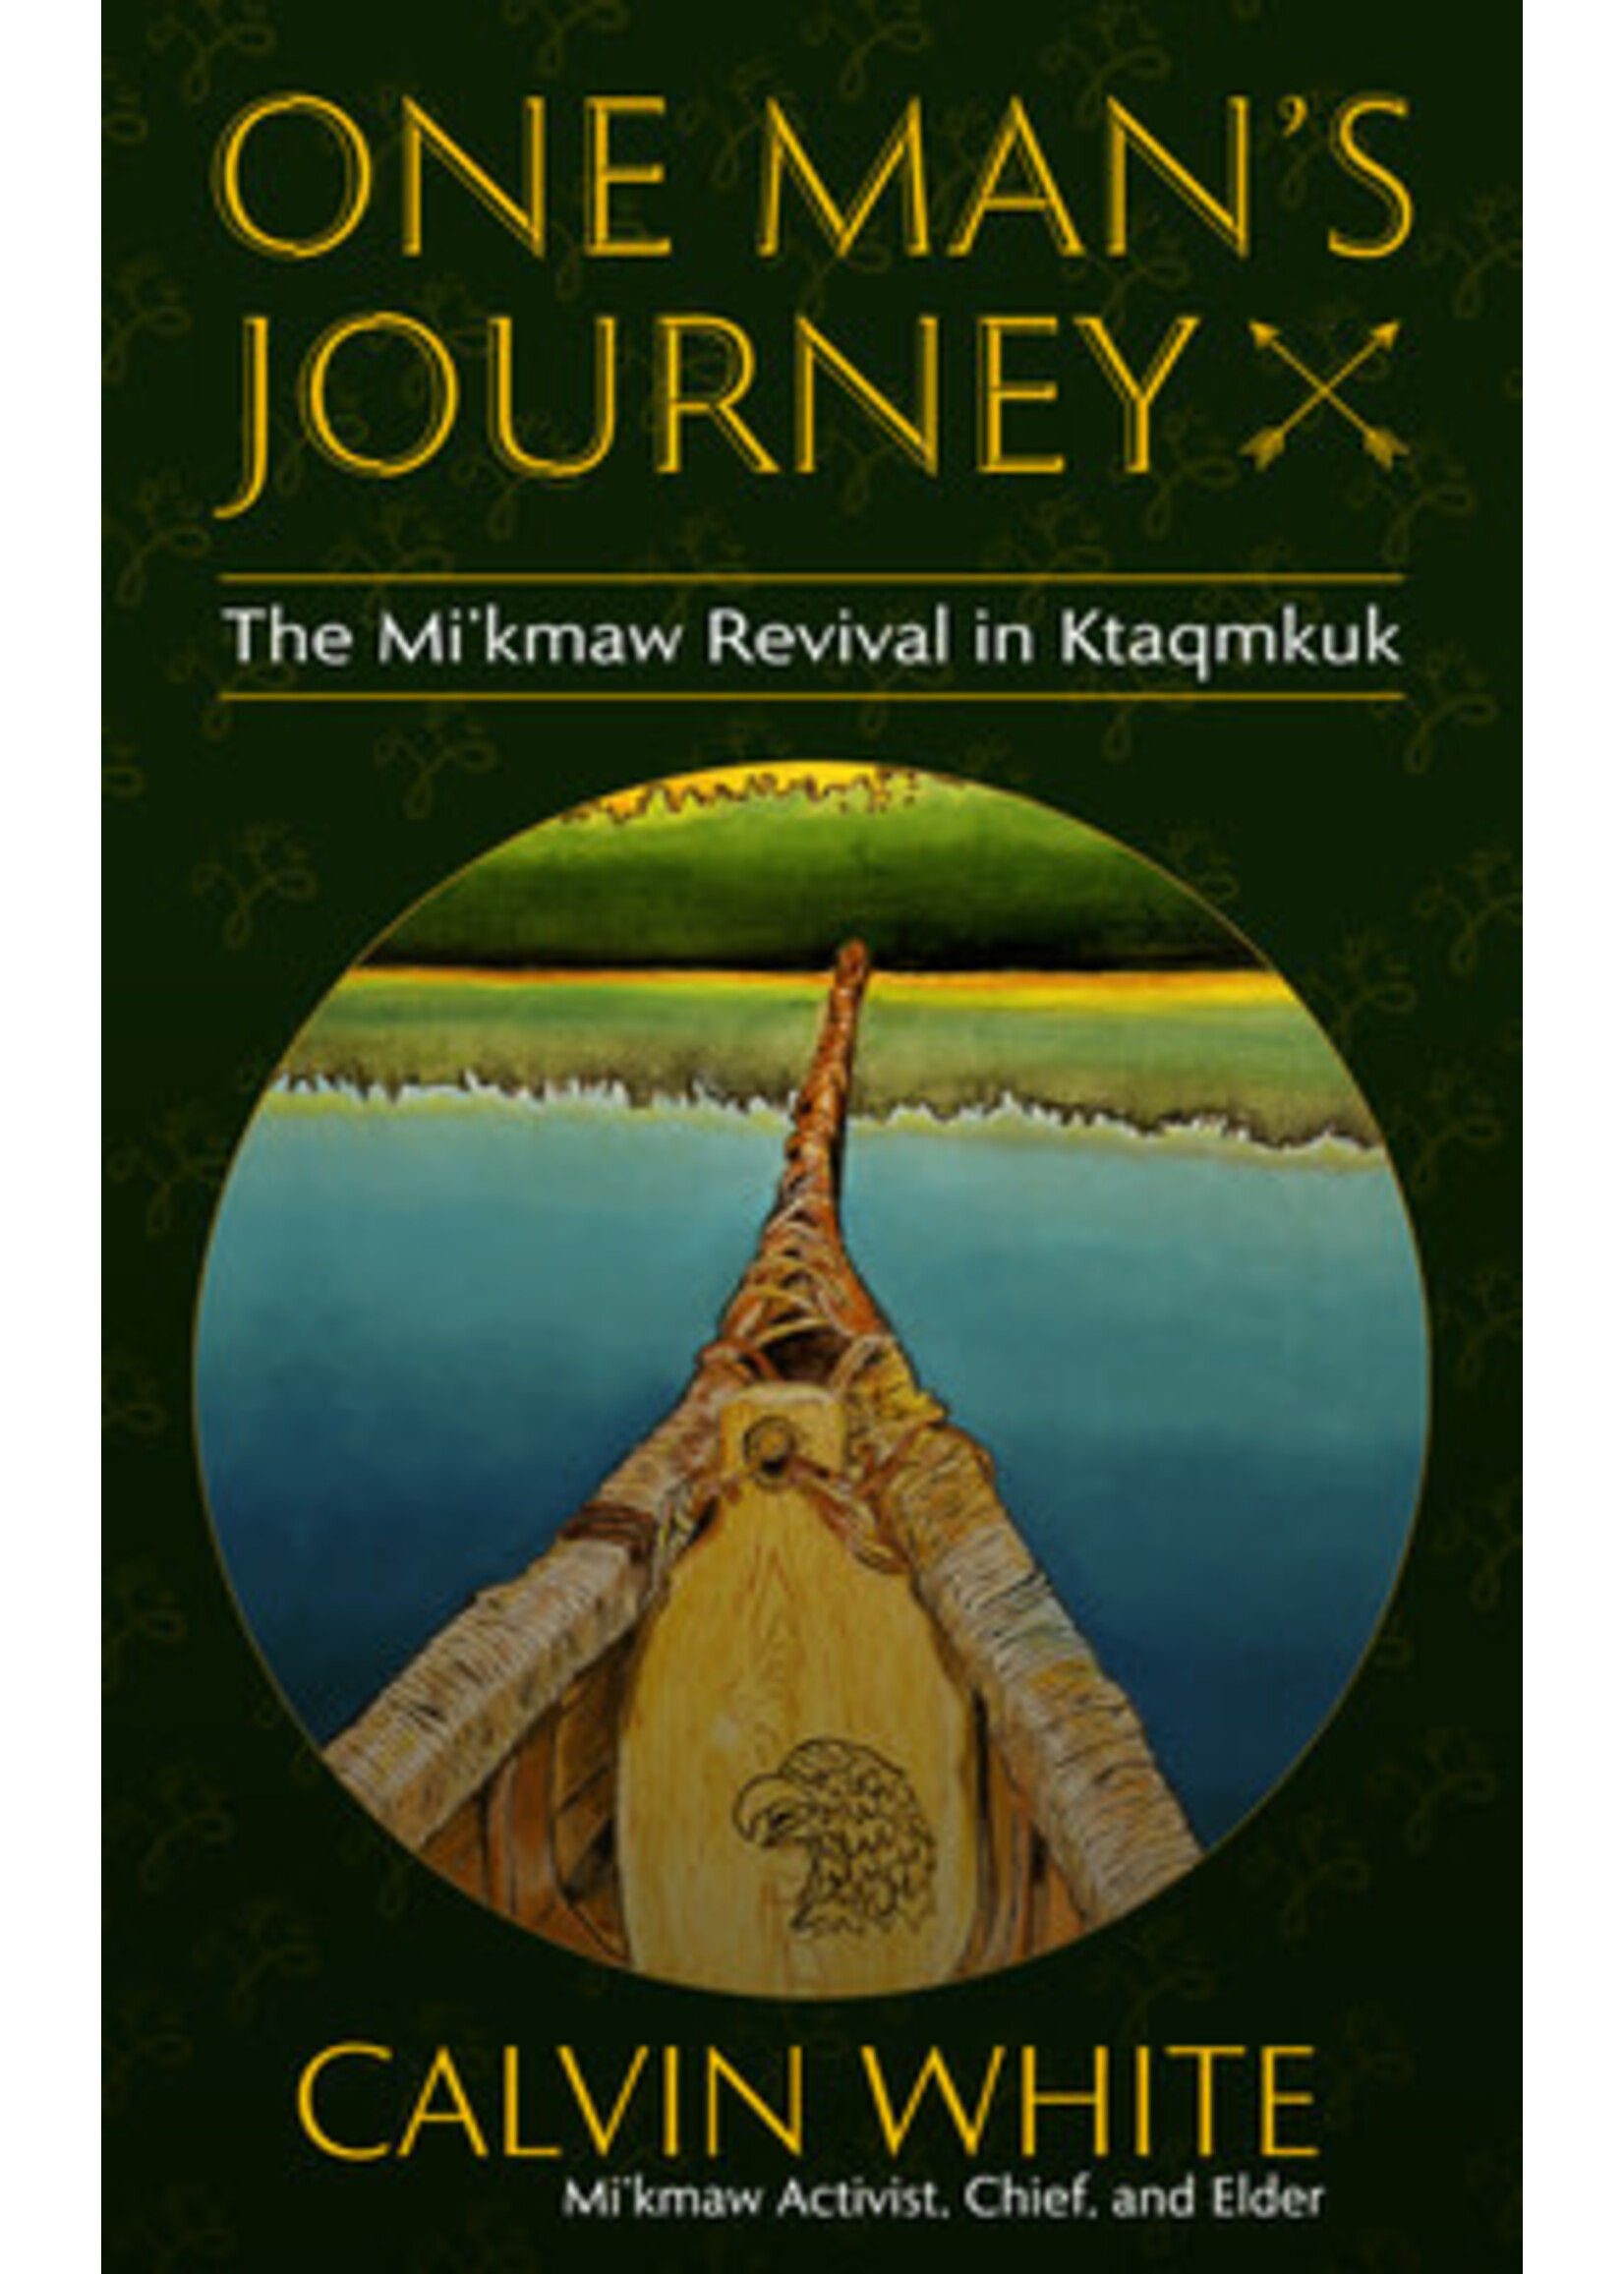 One Man's Journey: The Mi'kmaw Revival in Ktaqmkuk by Calvin White